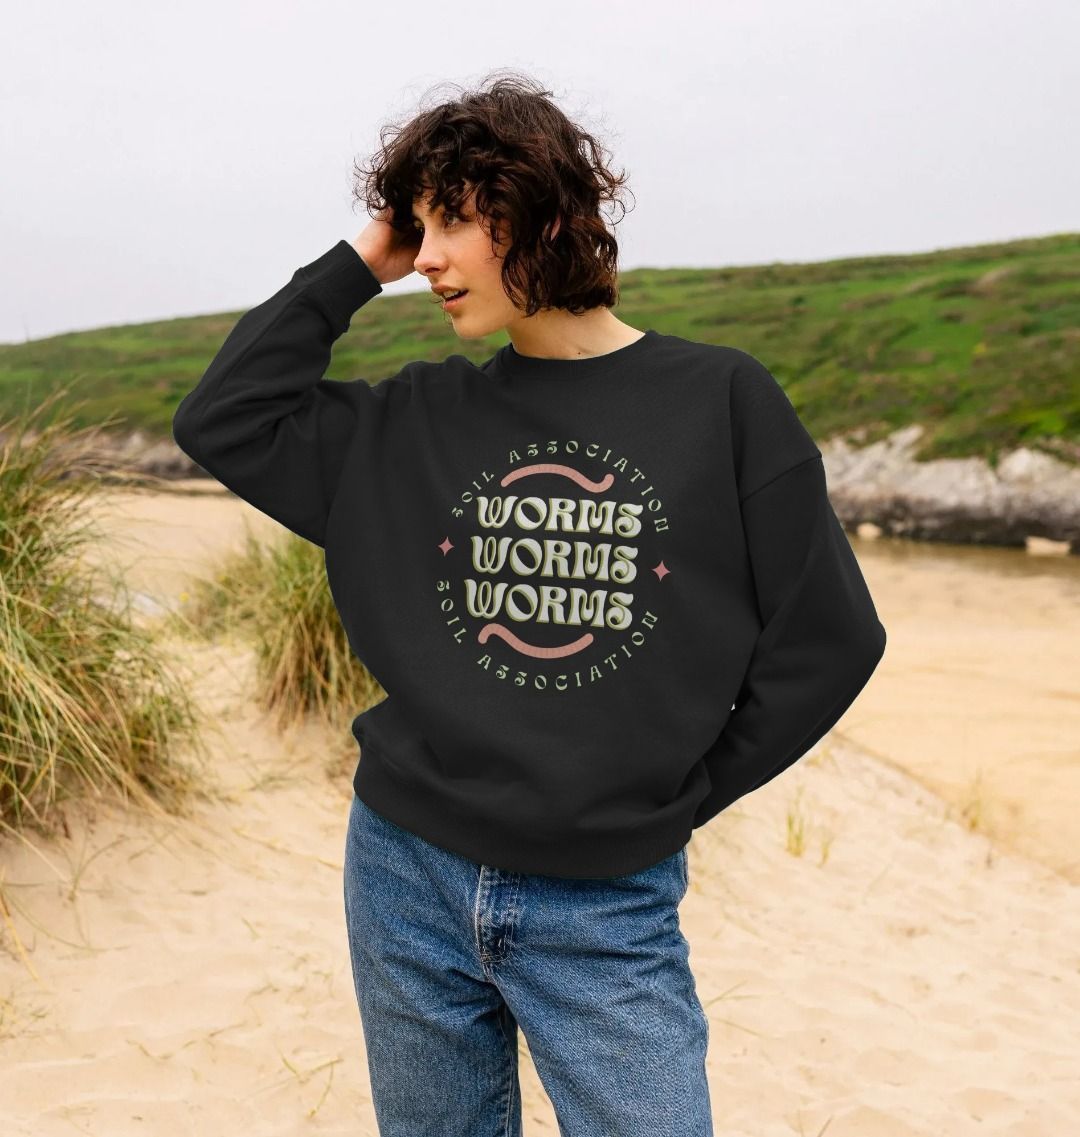 Worms Worms Worms oversized Jumper